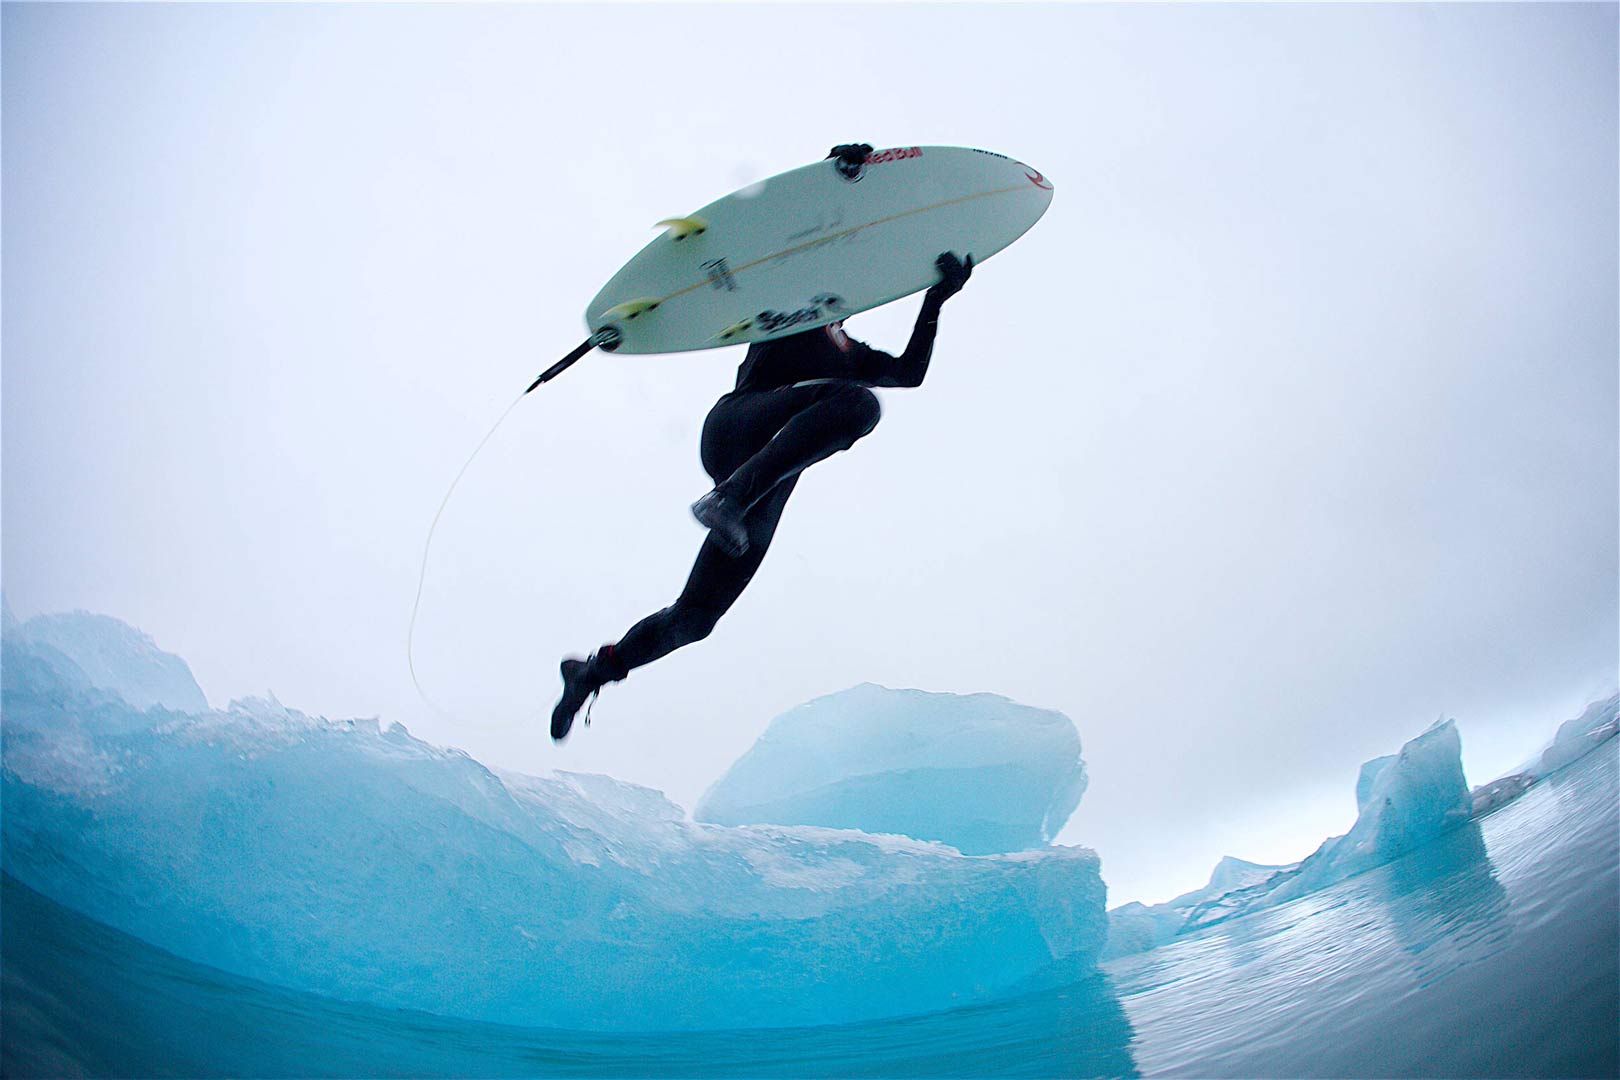  EXTREME LOCATION SURF ADVENTURE Heated wetsuit commercial shoot for Rip Curl in Iceland 